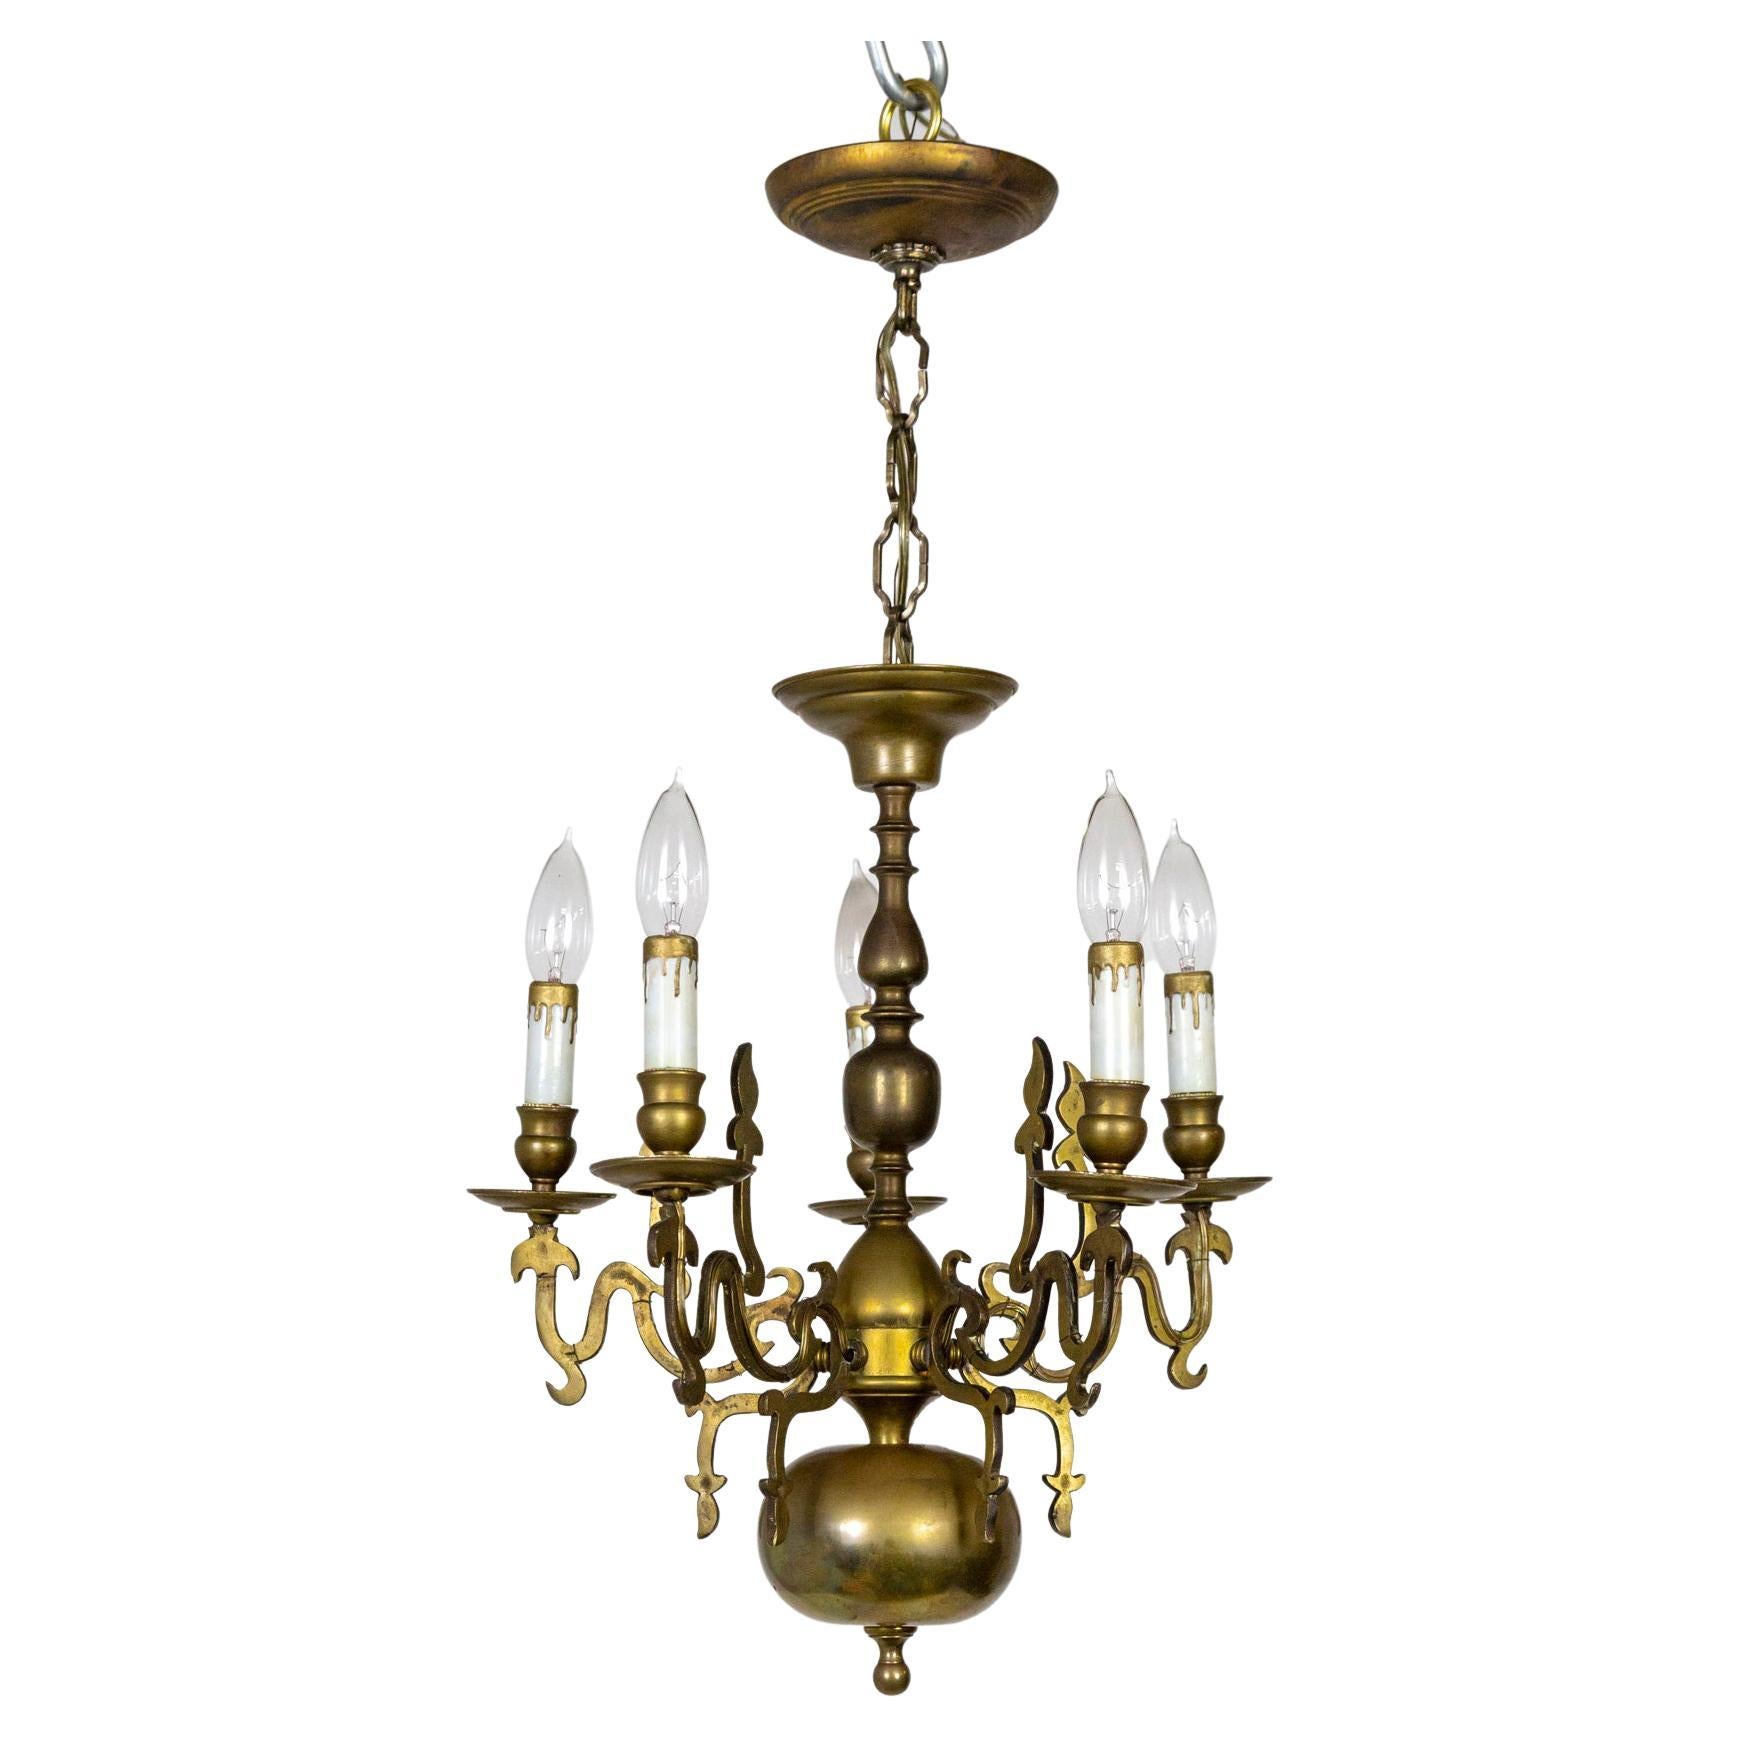 Dutch 19th Cent. 5-Light Brass Chandelier w/ Flame Detailing For Sale